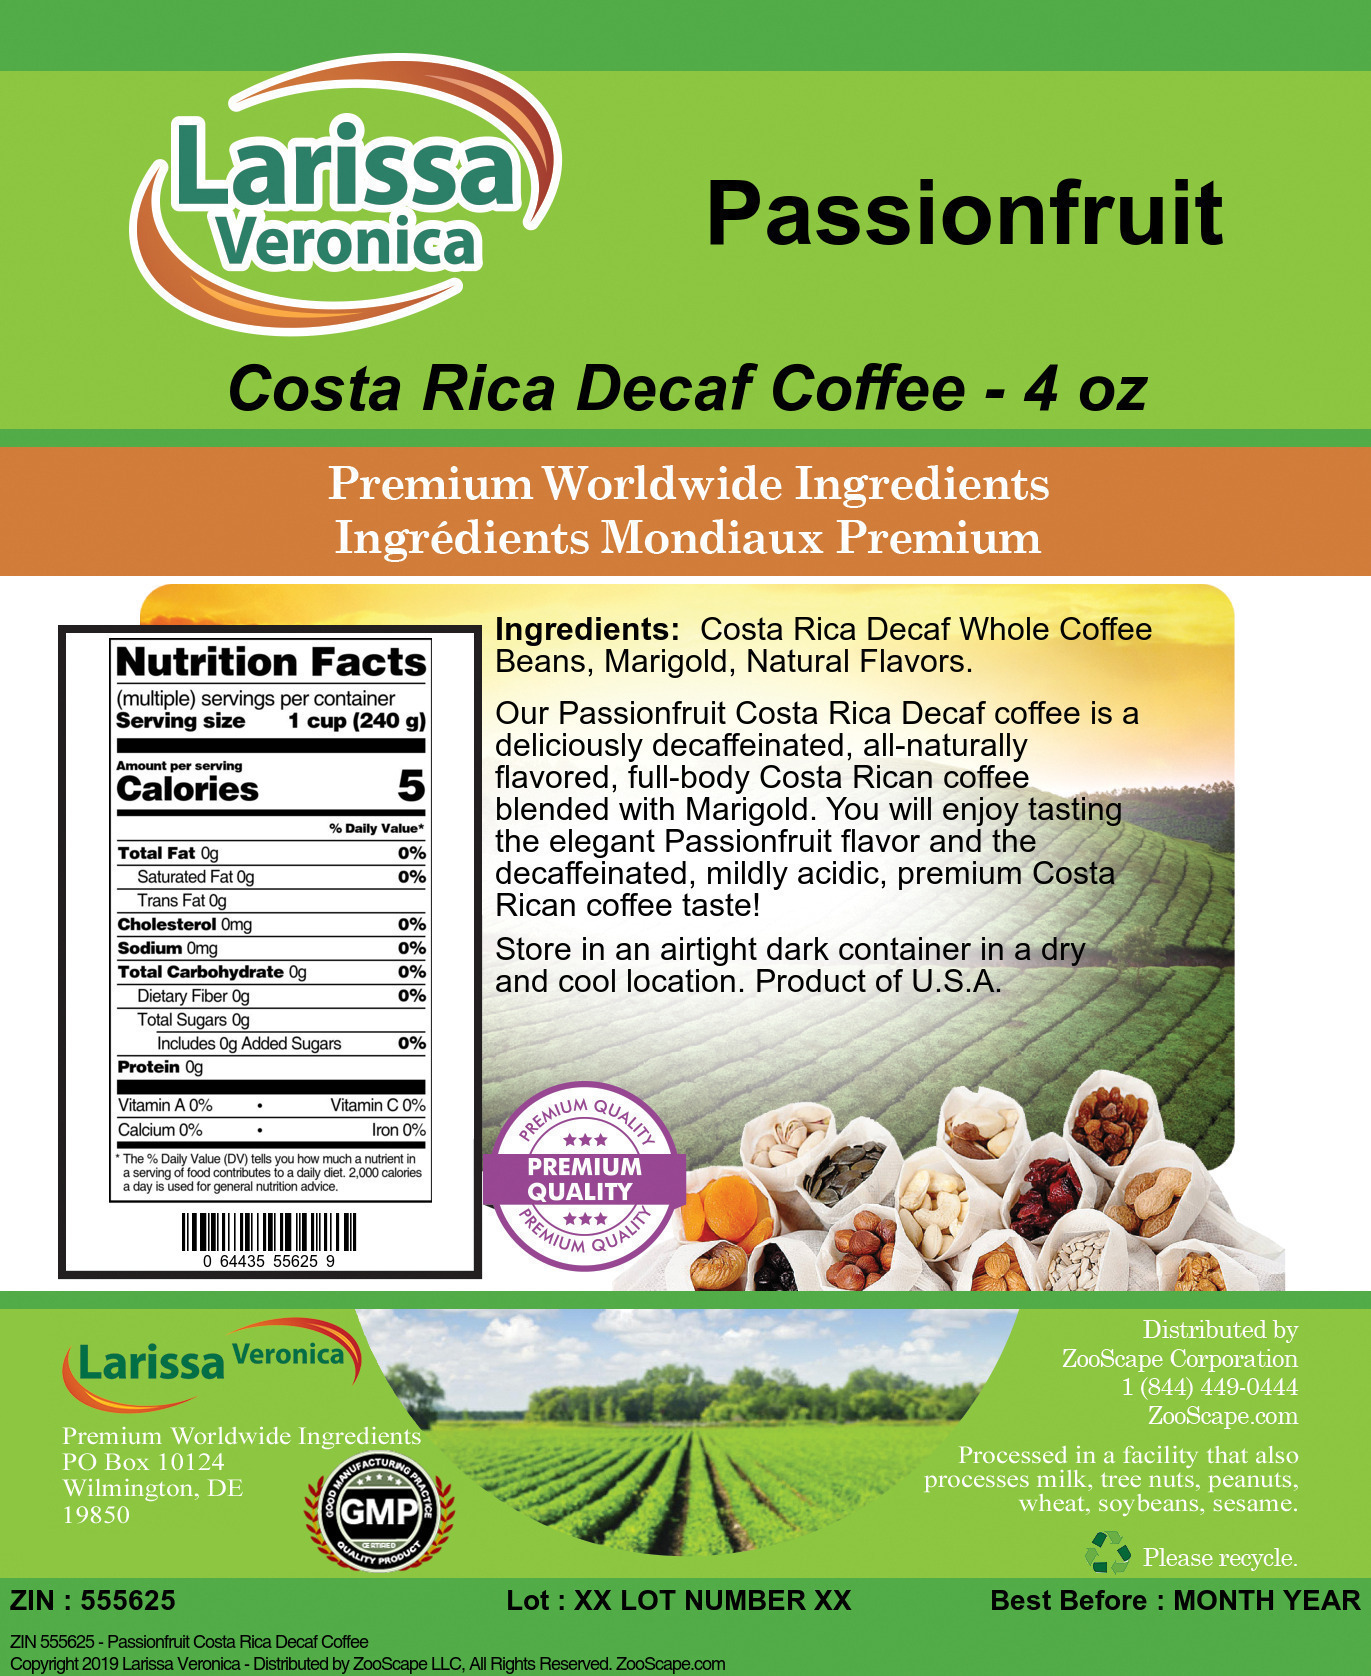 Passionfruit Costa Rica Decaf Coffee - Label